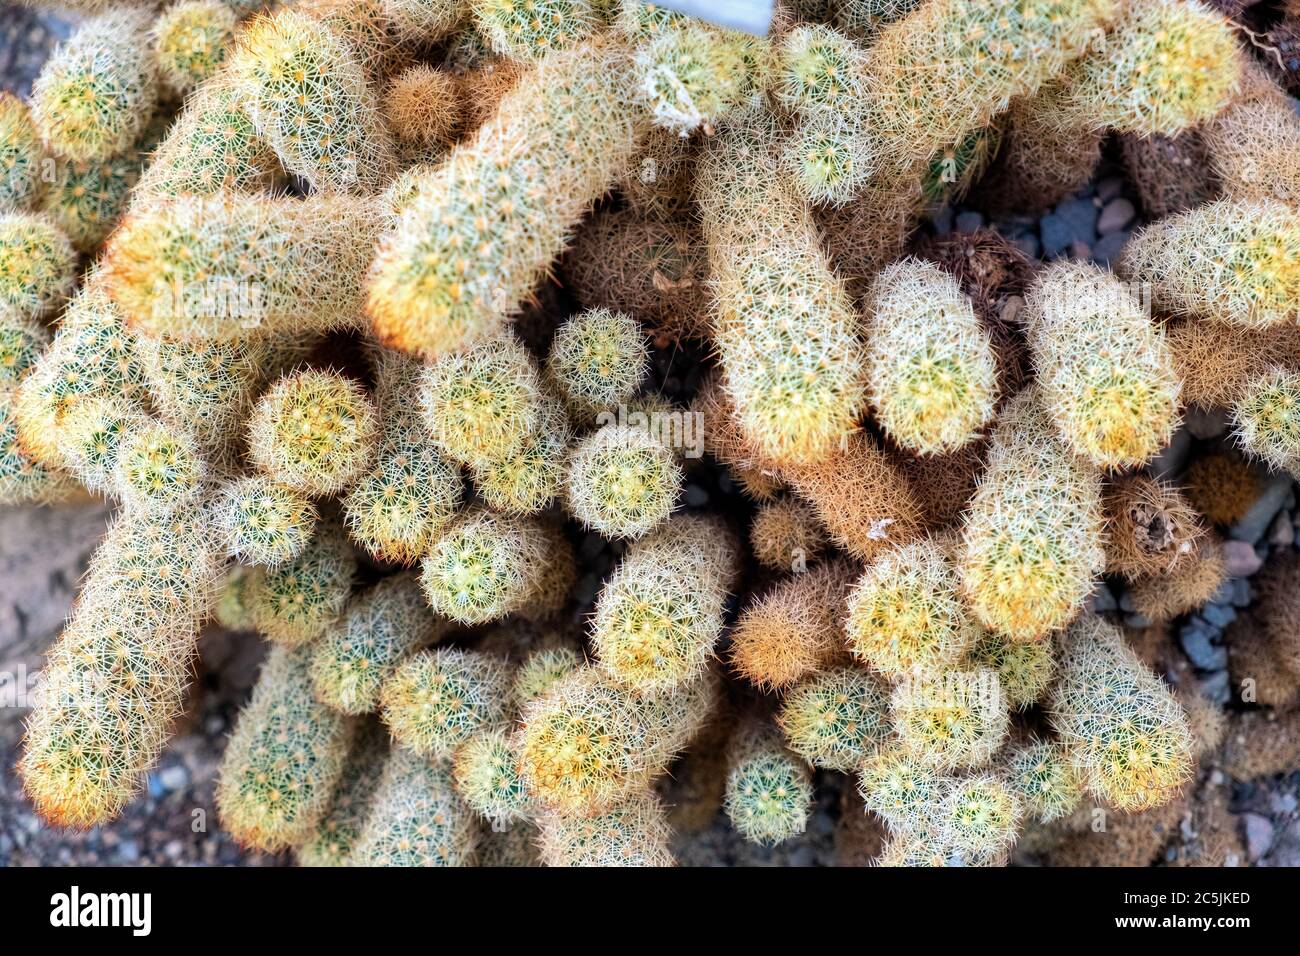 Thicket of Gold lace cactus plant - latin Mammillaria elongate - also known as Ladyfinger cactus native to central Mexico, in a botanical garden Centr Stock Photo